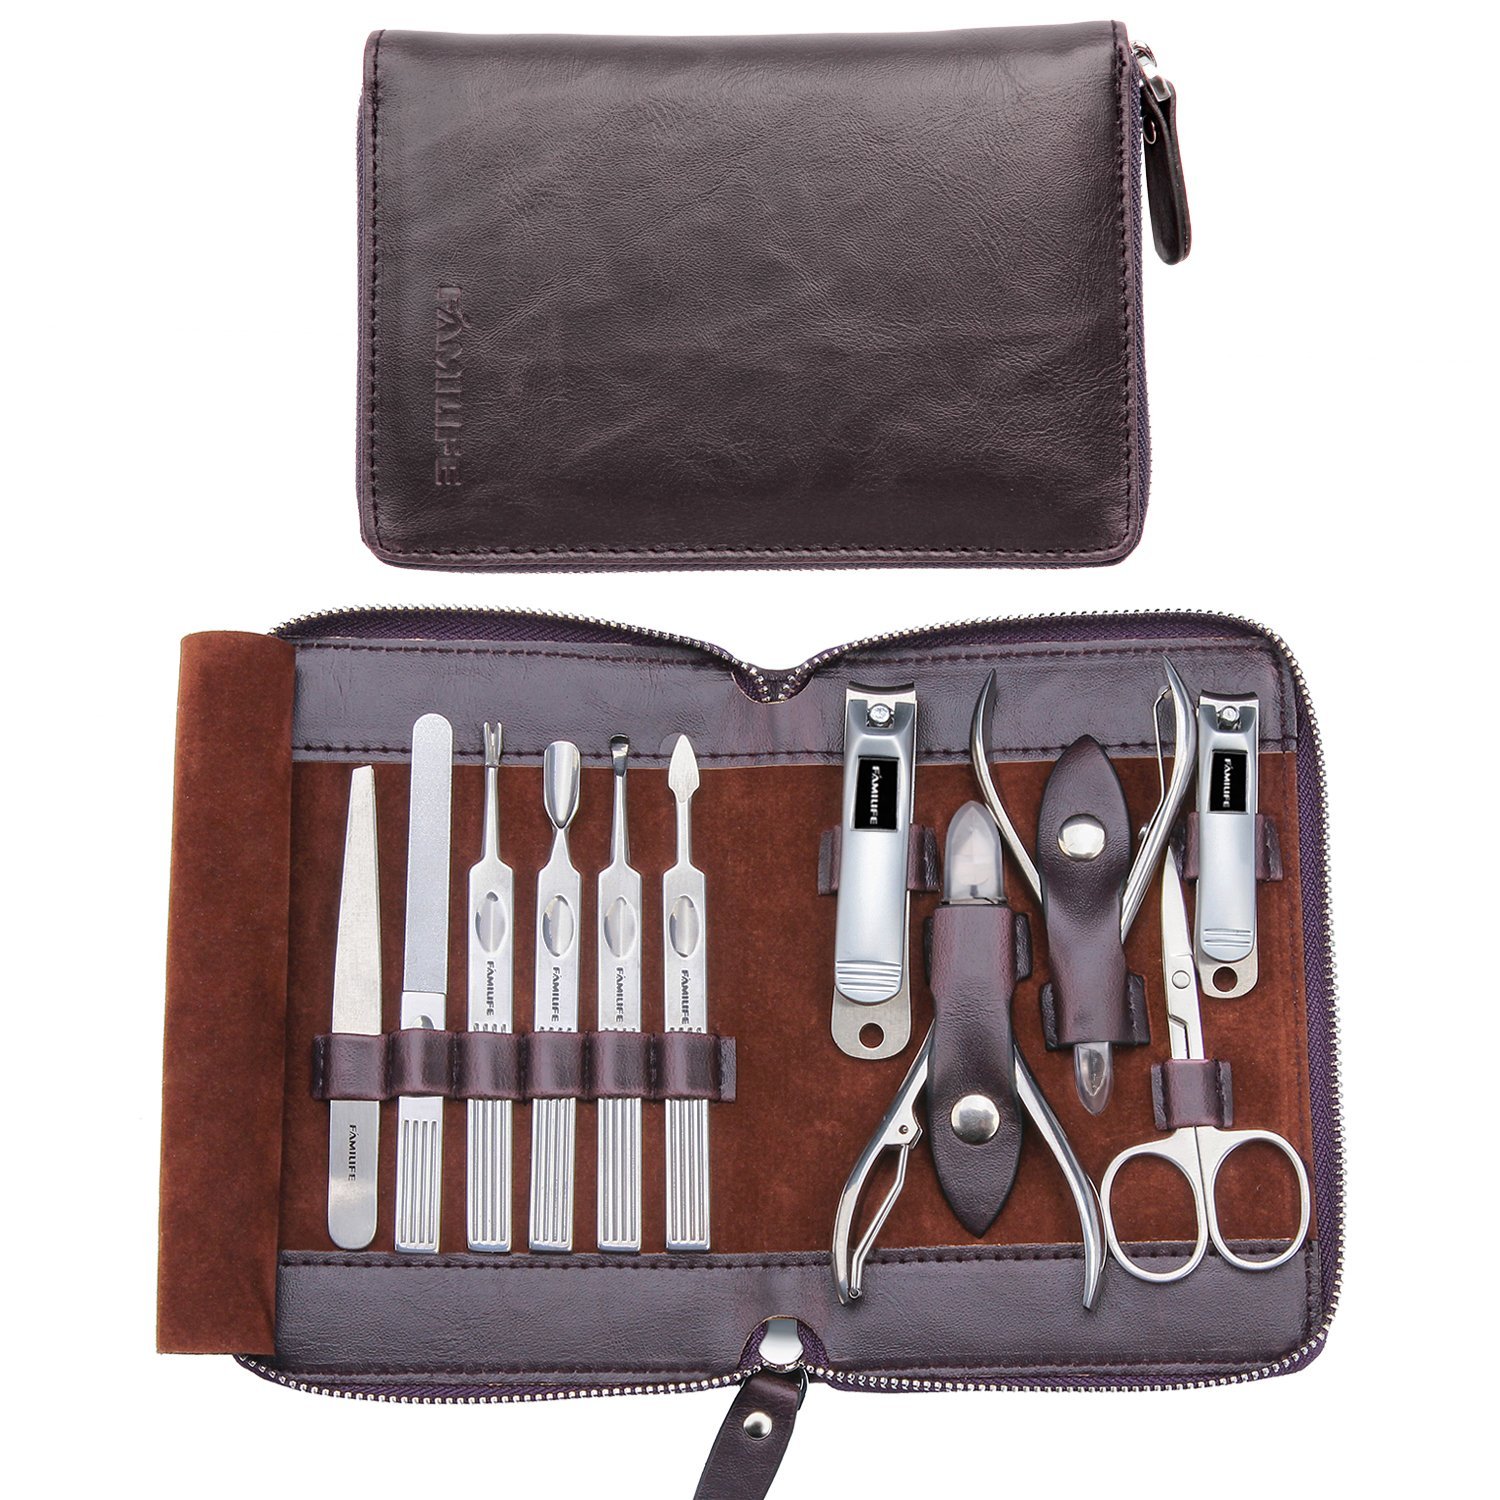 Best Manicure Set for Men 2017: 10 Piece Stainless Steel 2018